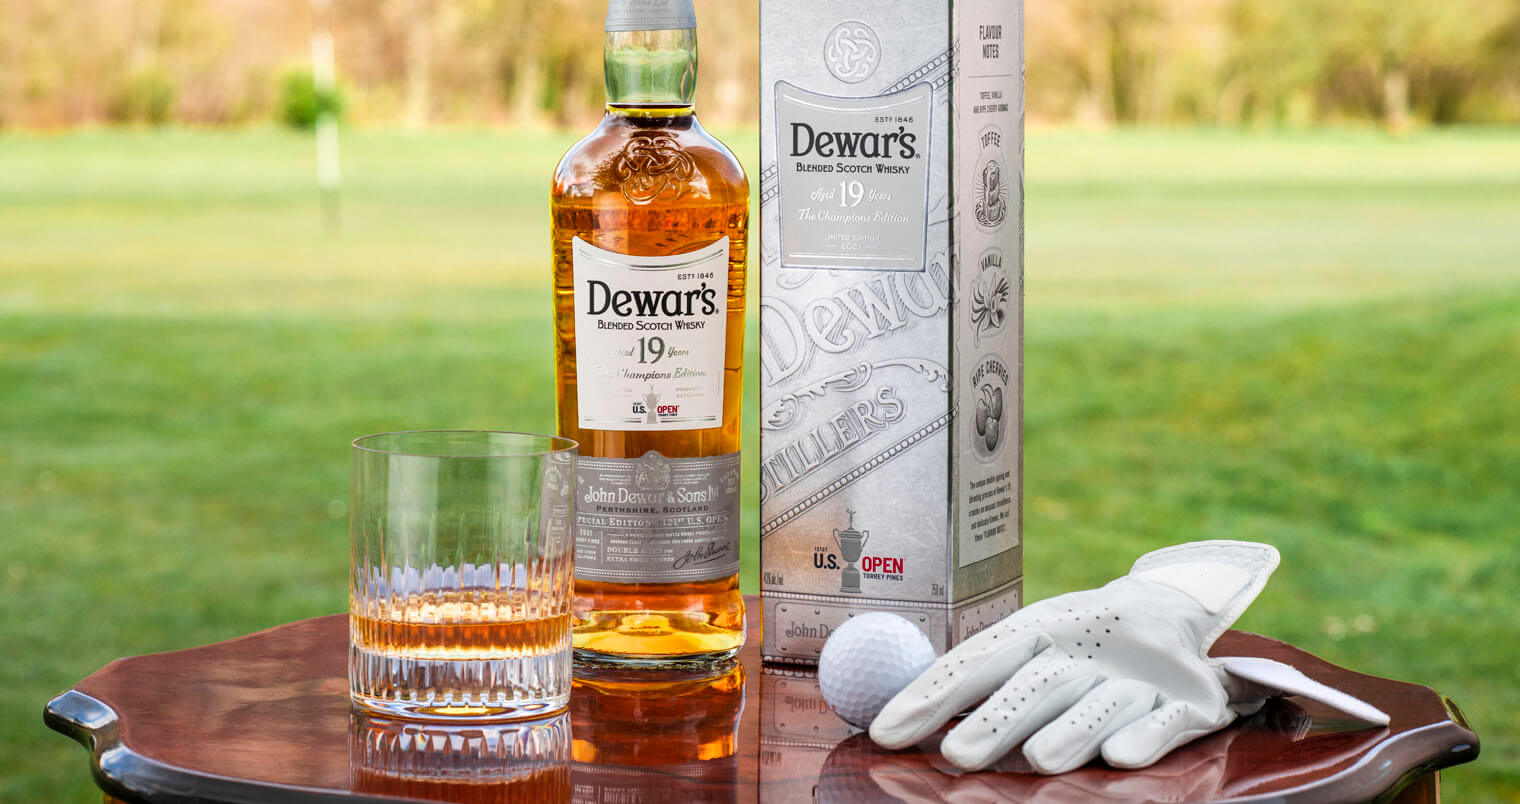 Dewar's Launches "The Champions" featured image